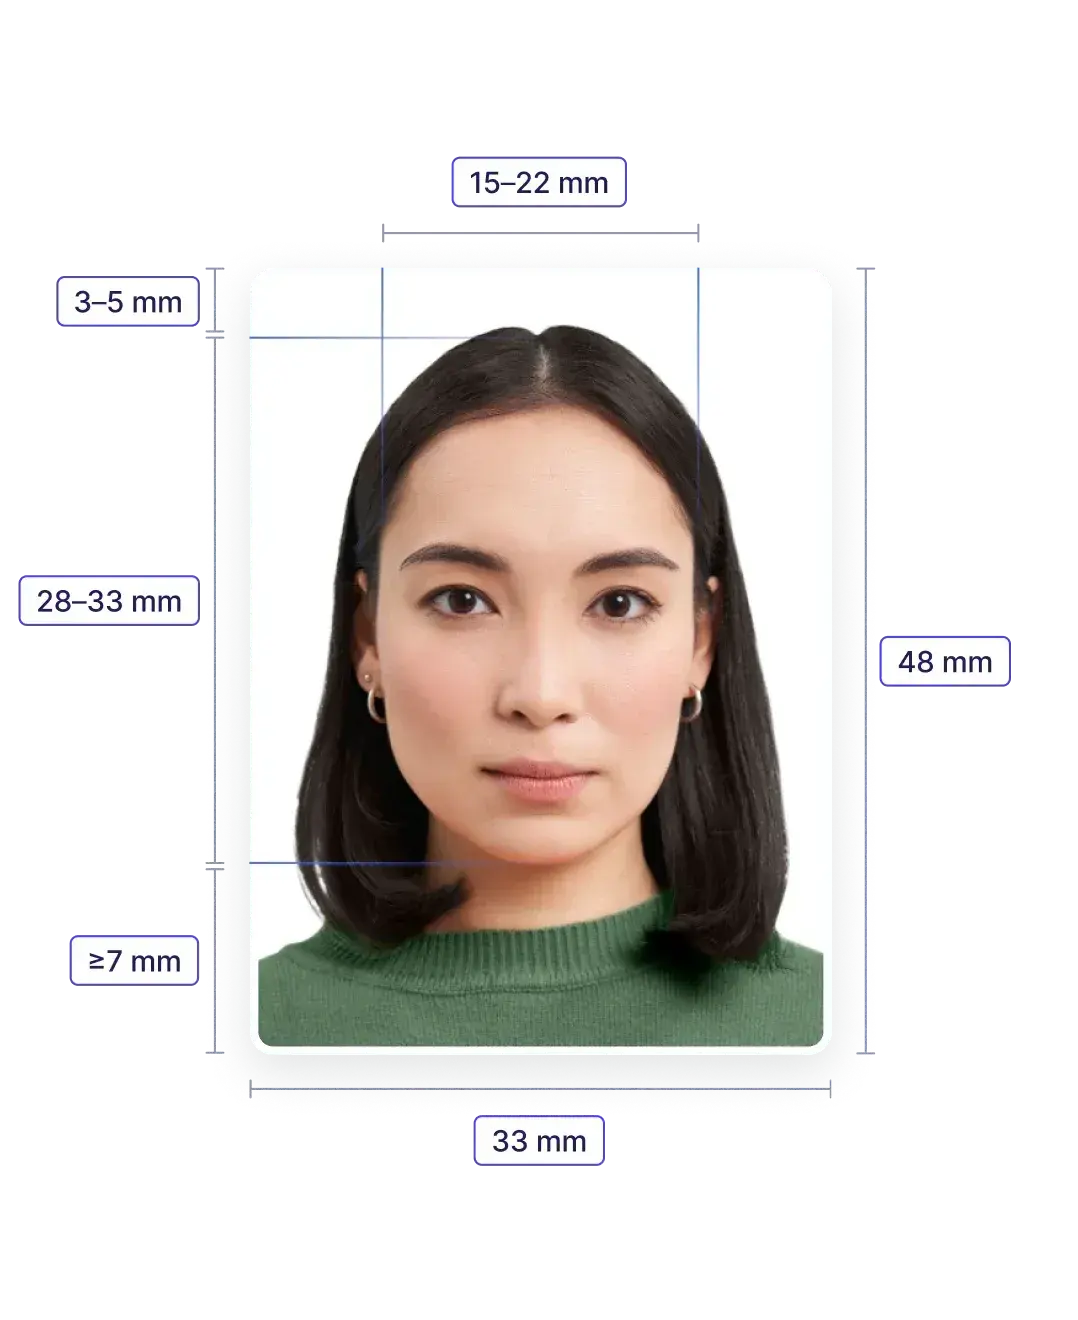 Chinese Passport Photo—Specifications